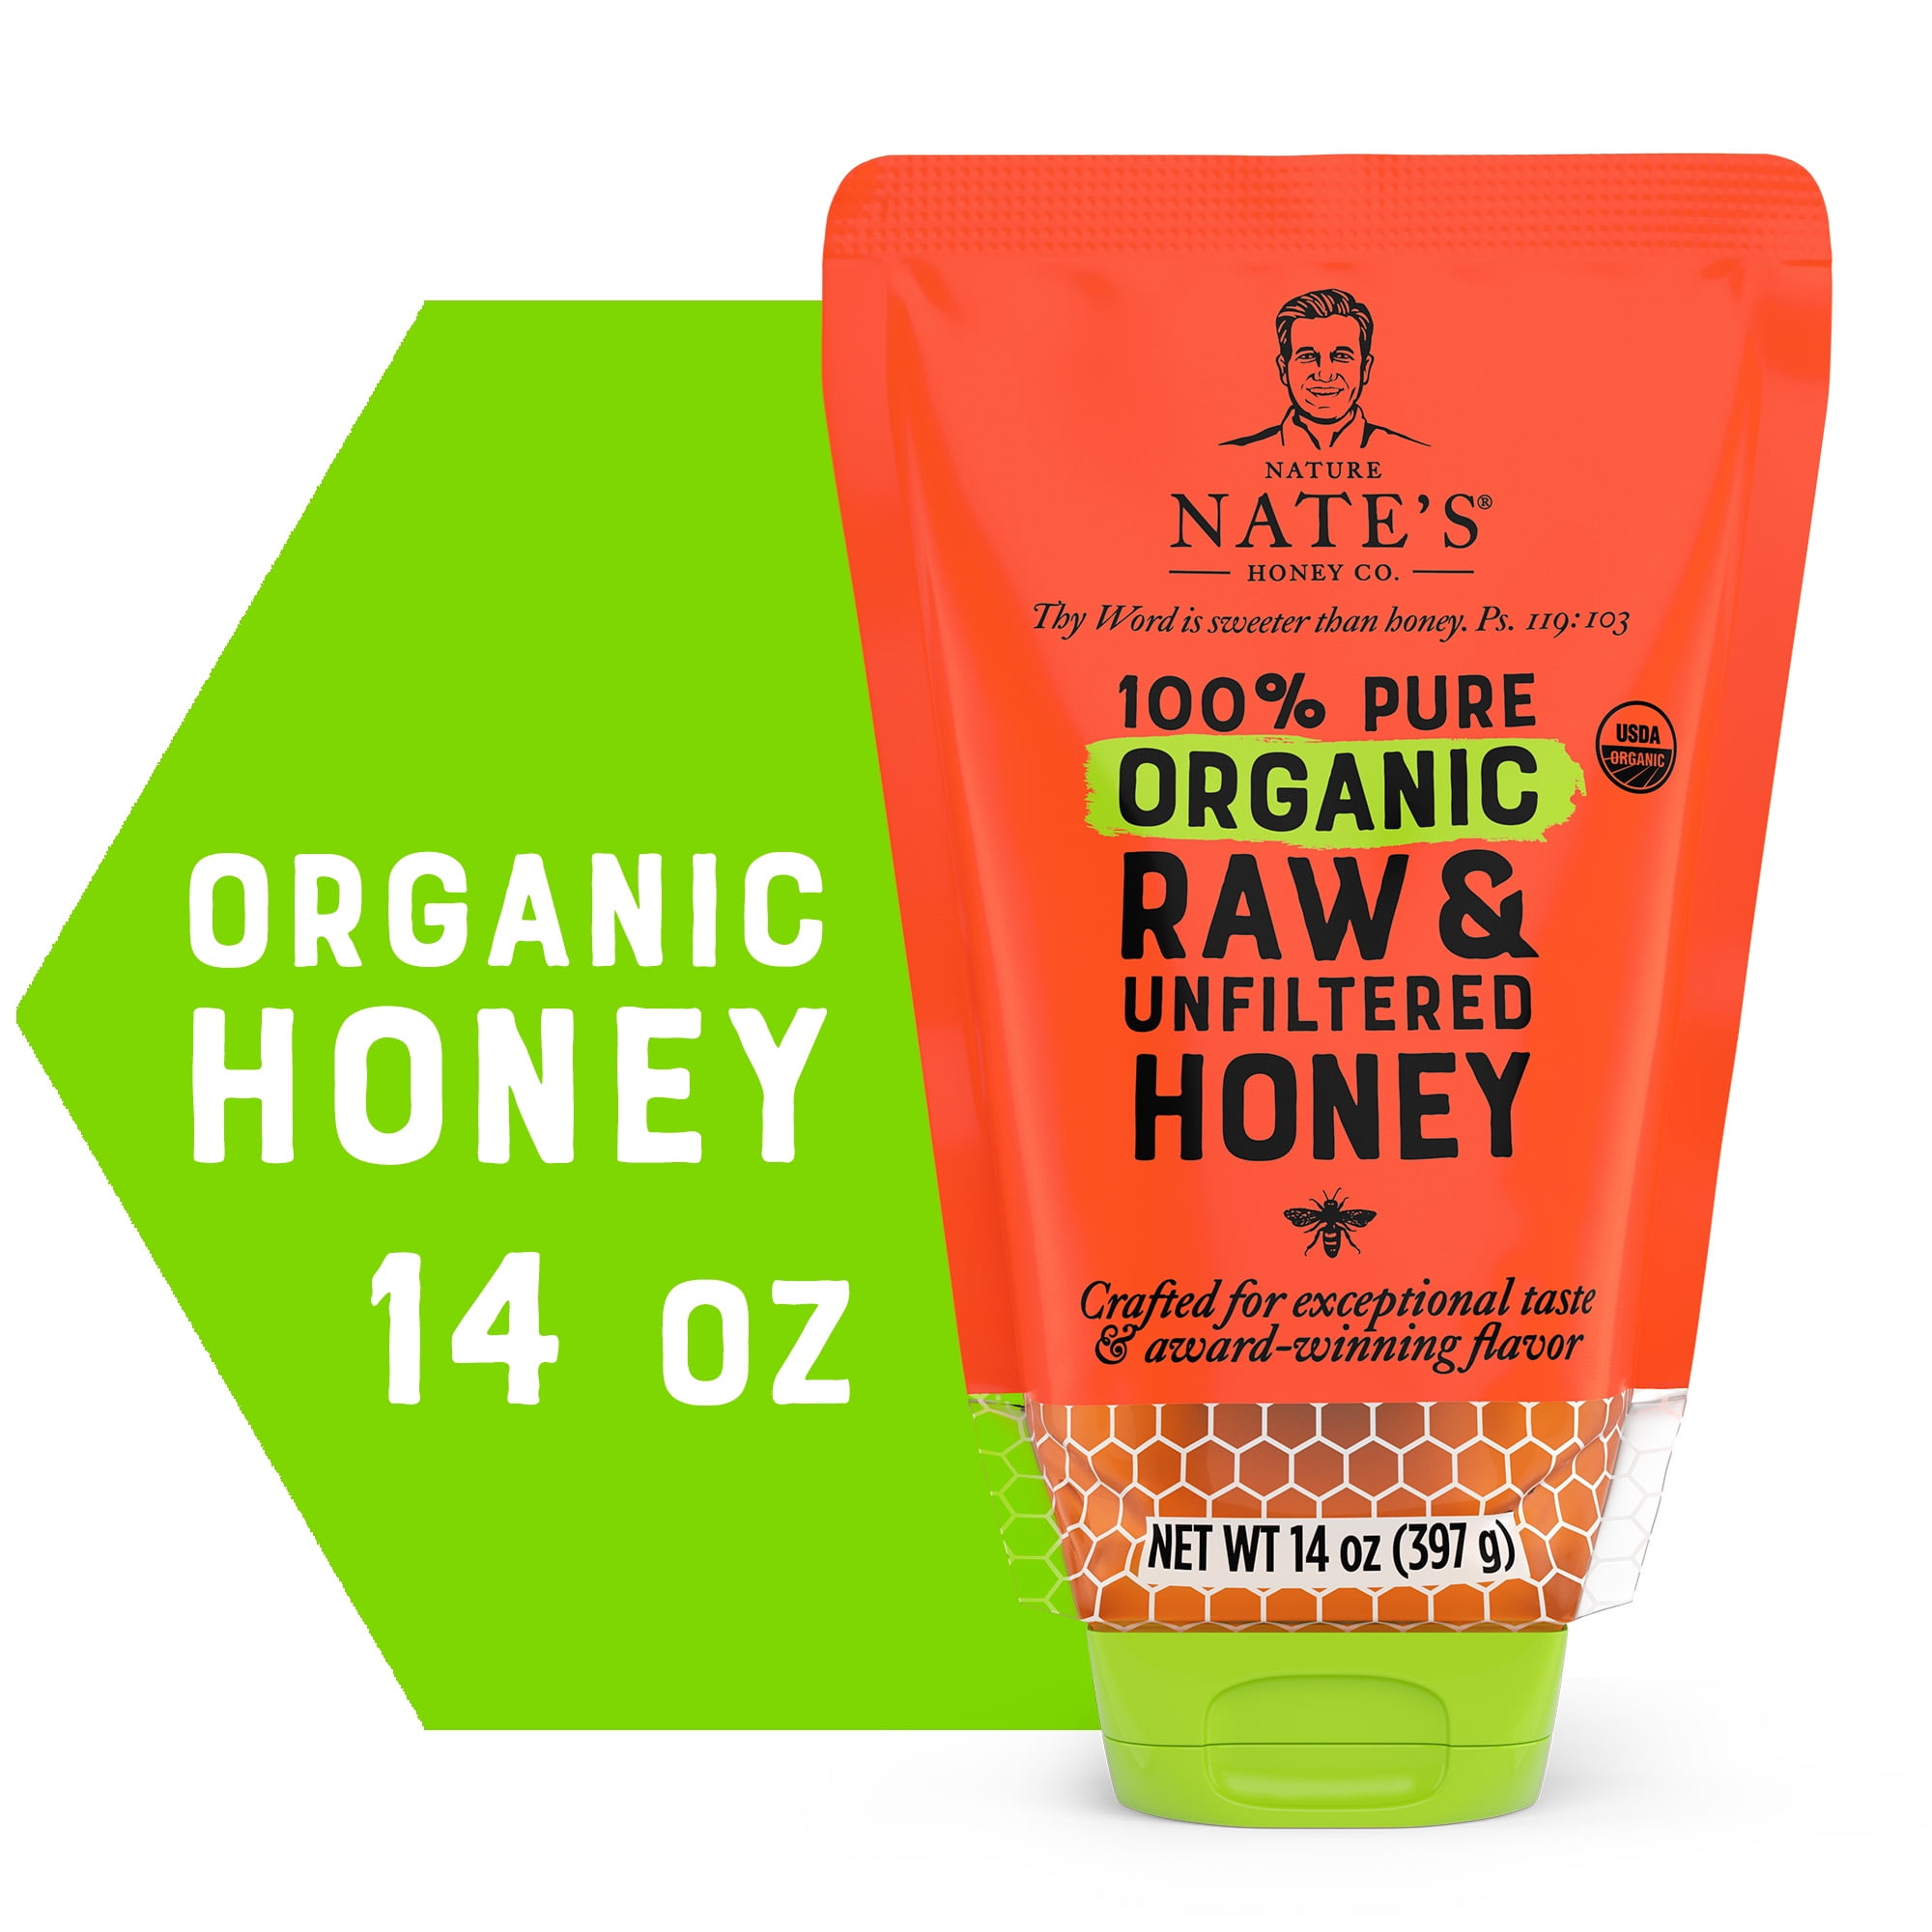 Nature Nate's Organic Honey: 100% Pure, Raw, and Unfiltered Honey Pouch, 14 fl oz